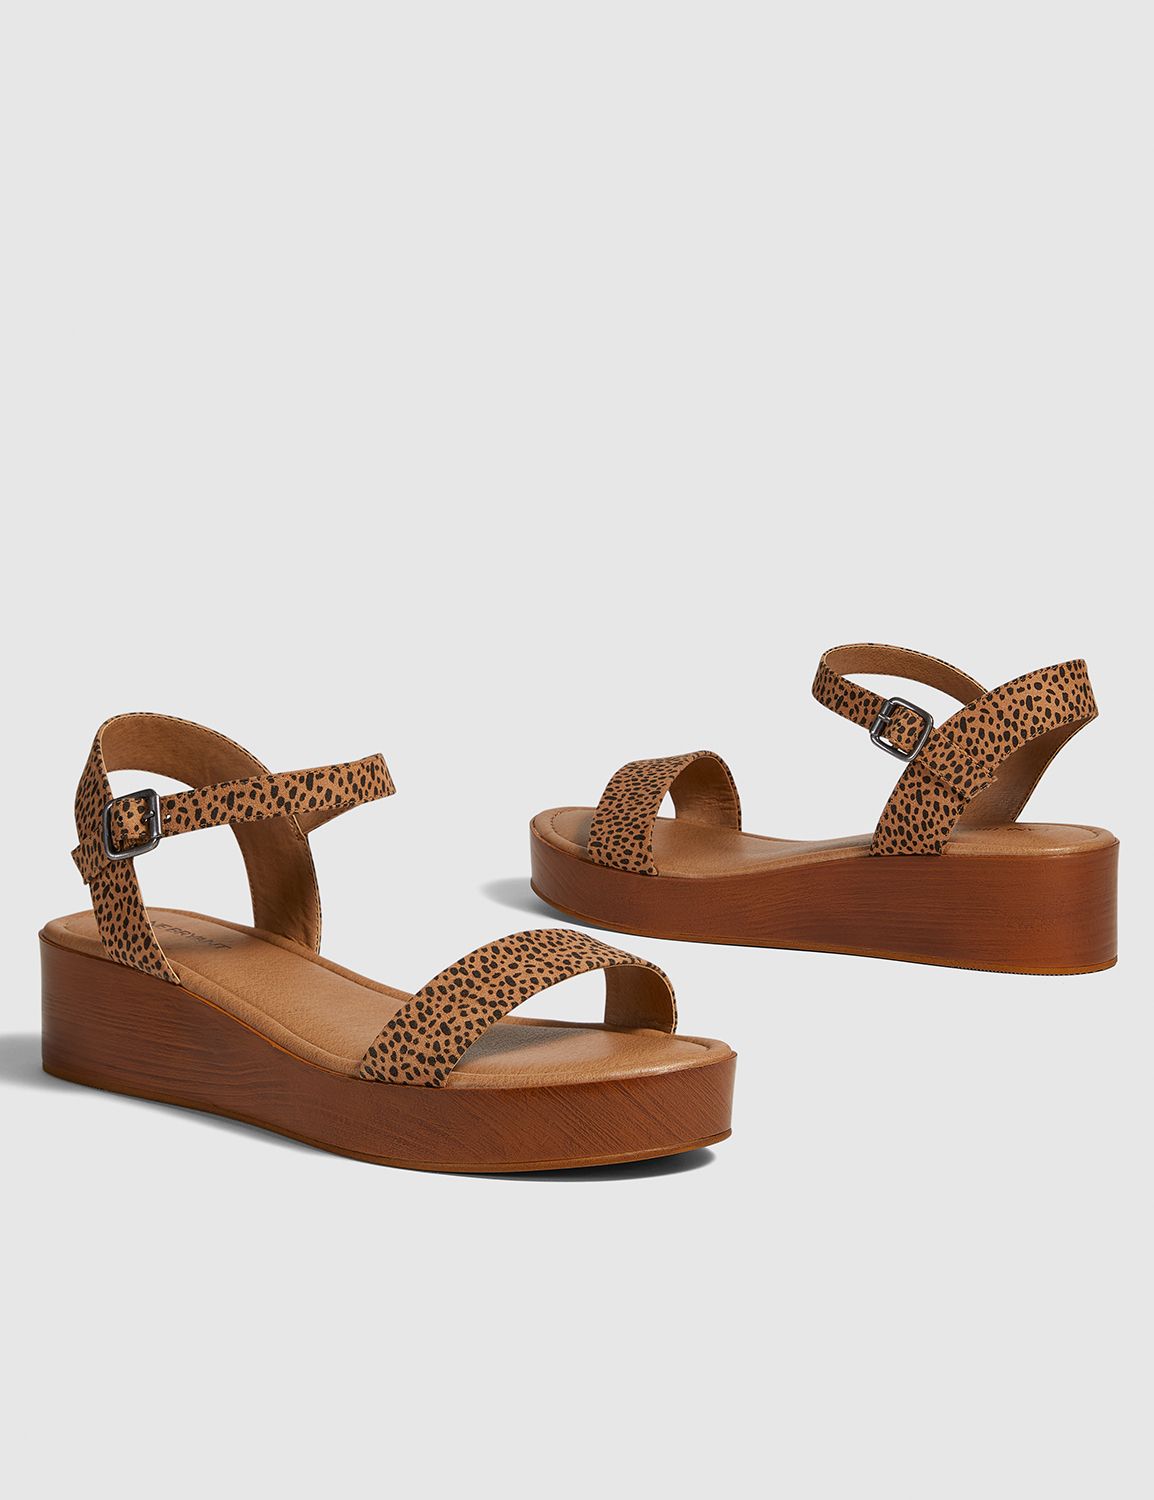 fashionable wide width sandals